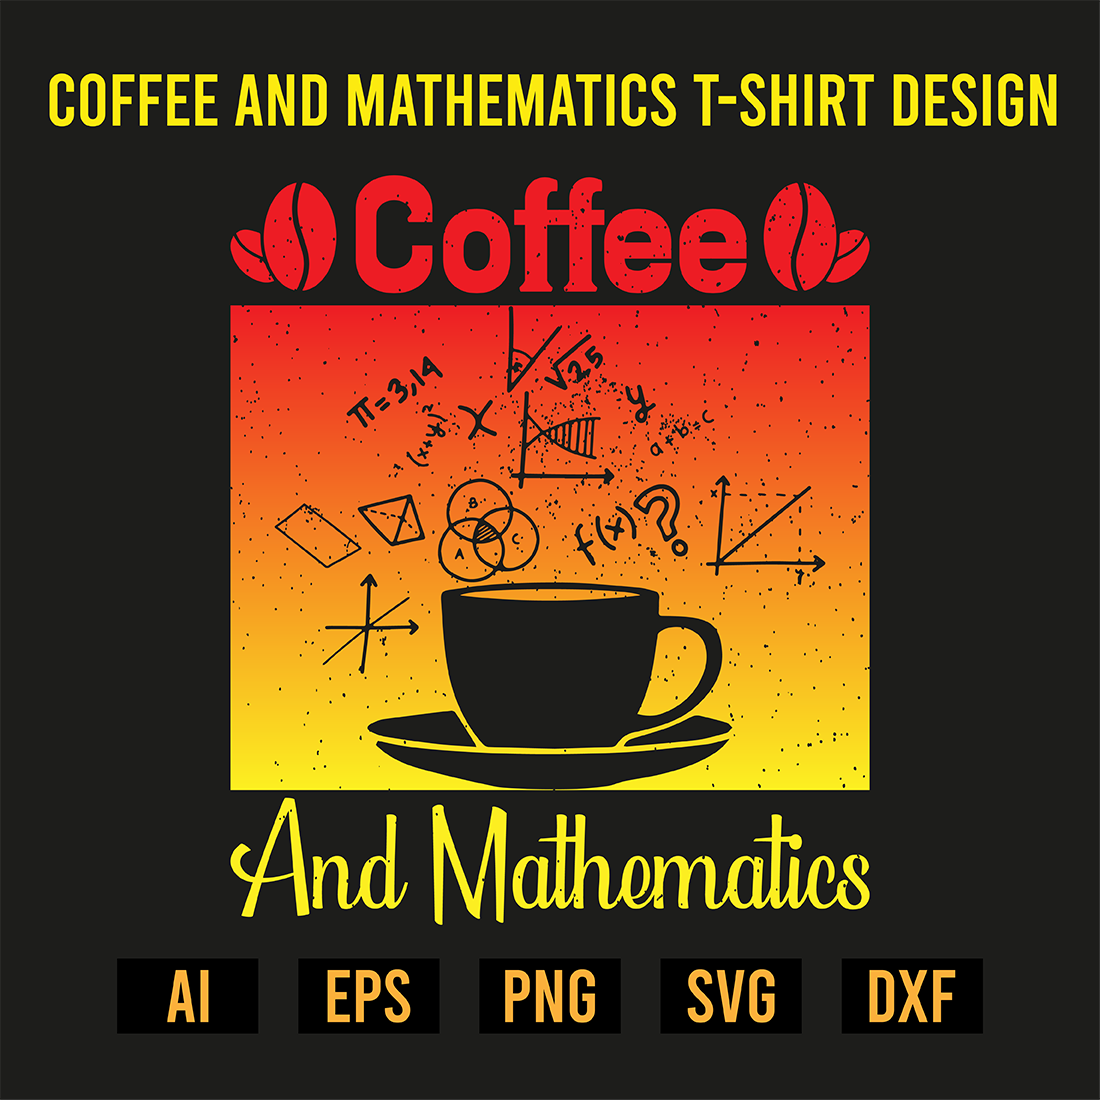 Coffee and Mathematics T-Shirt Design cover image.